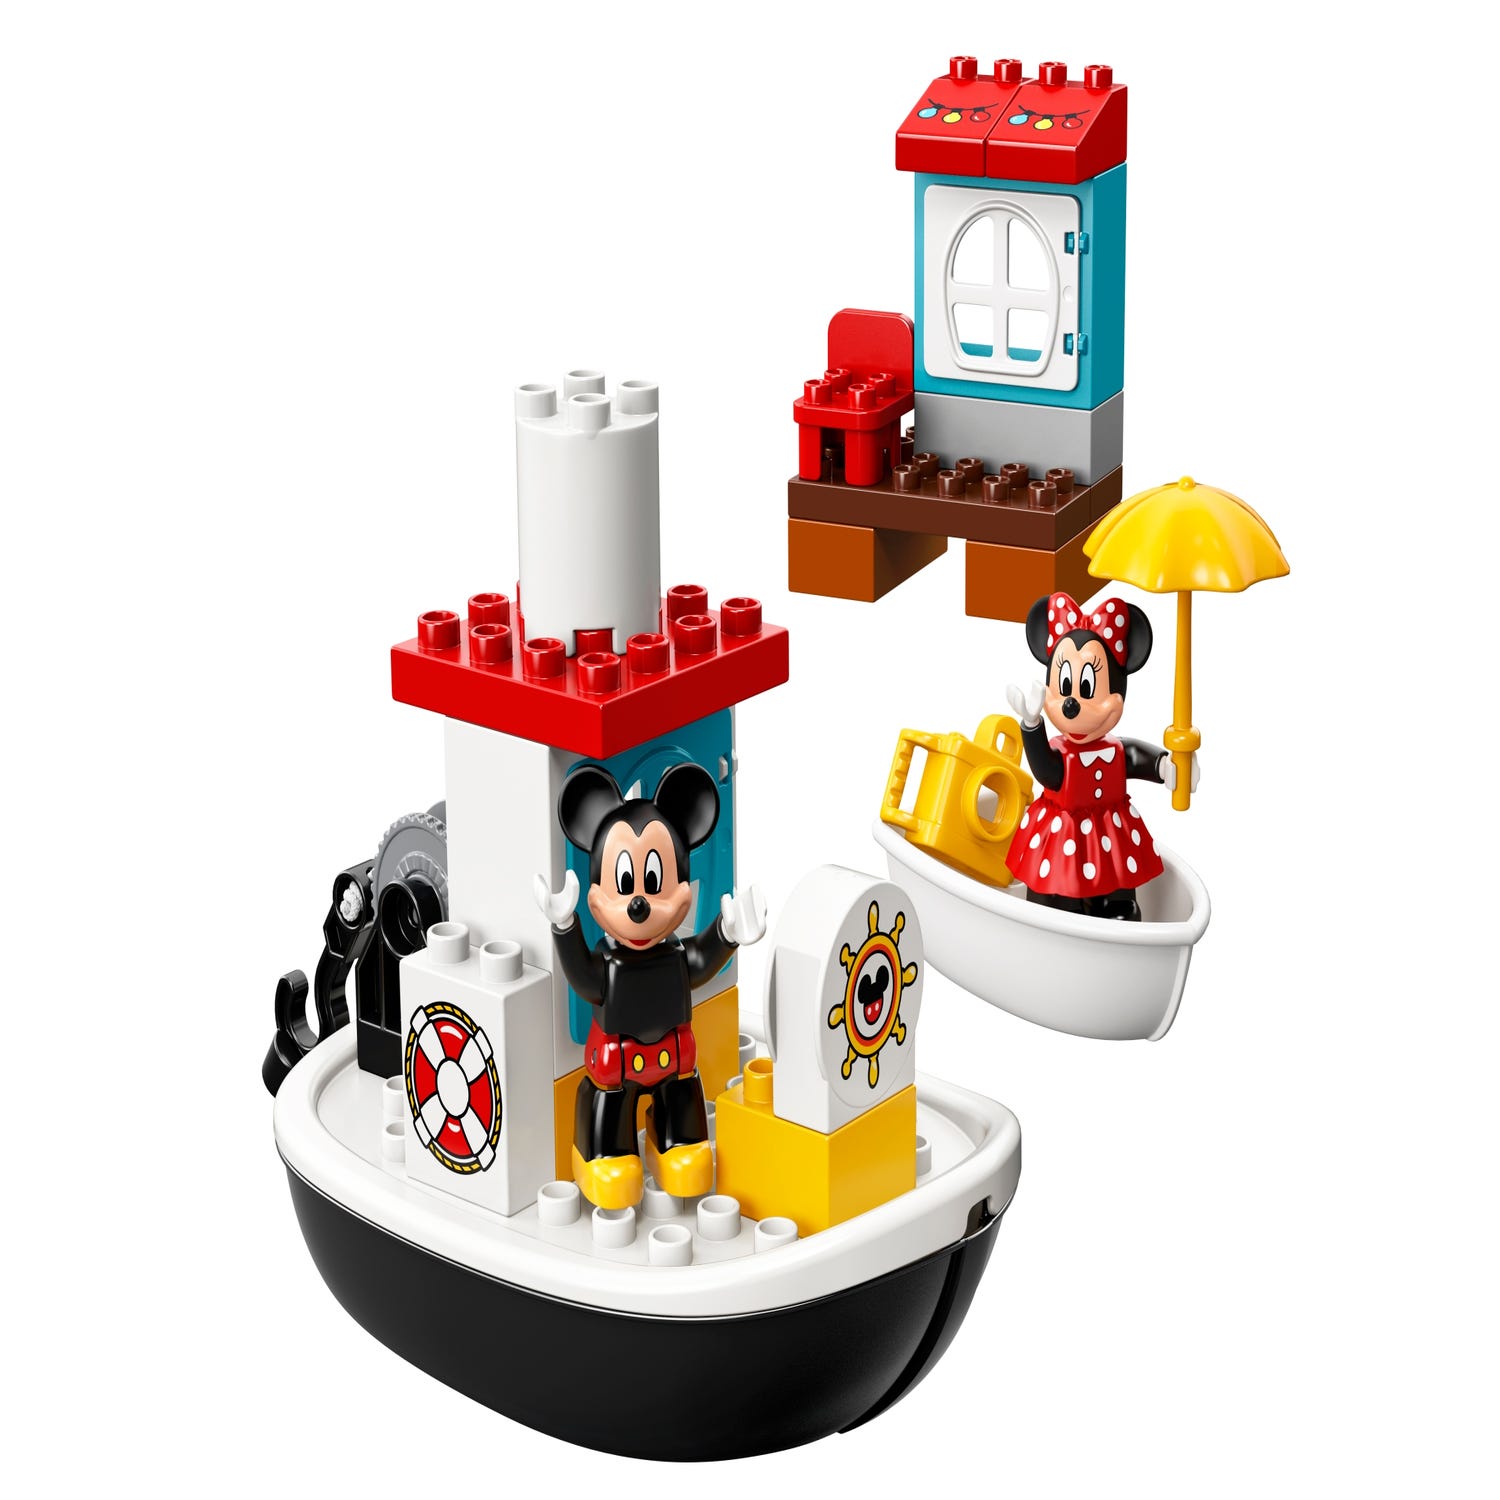 Mickey's Boat 10881 | Disney™ | Buy online at the Official LEGO® US